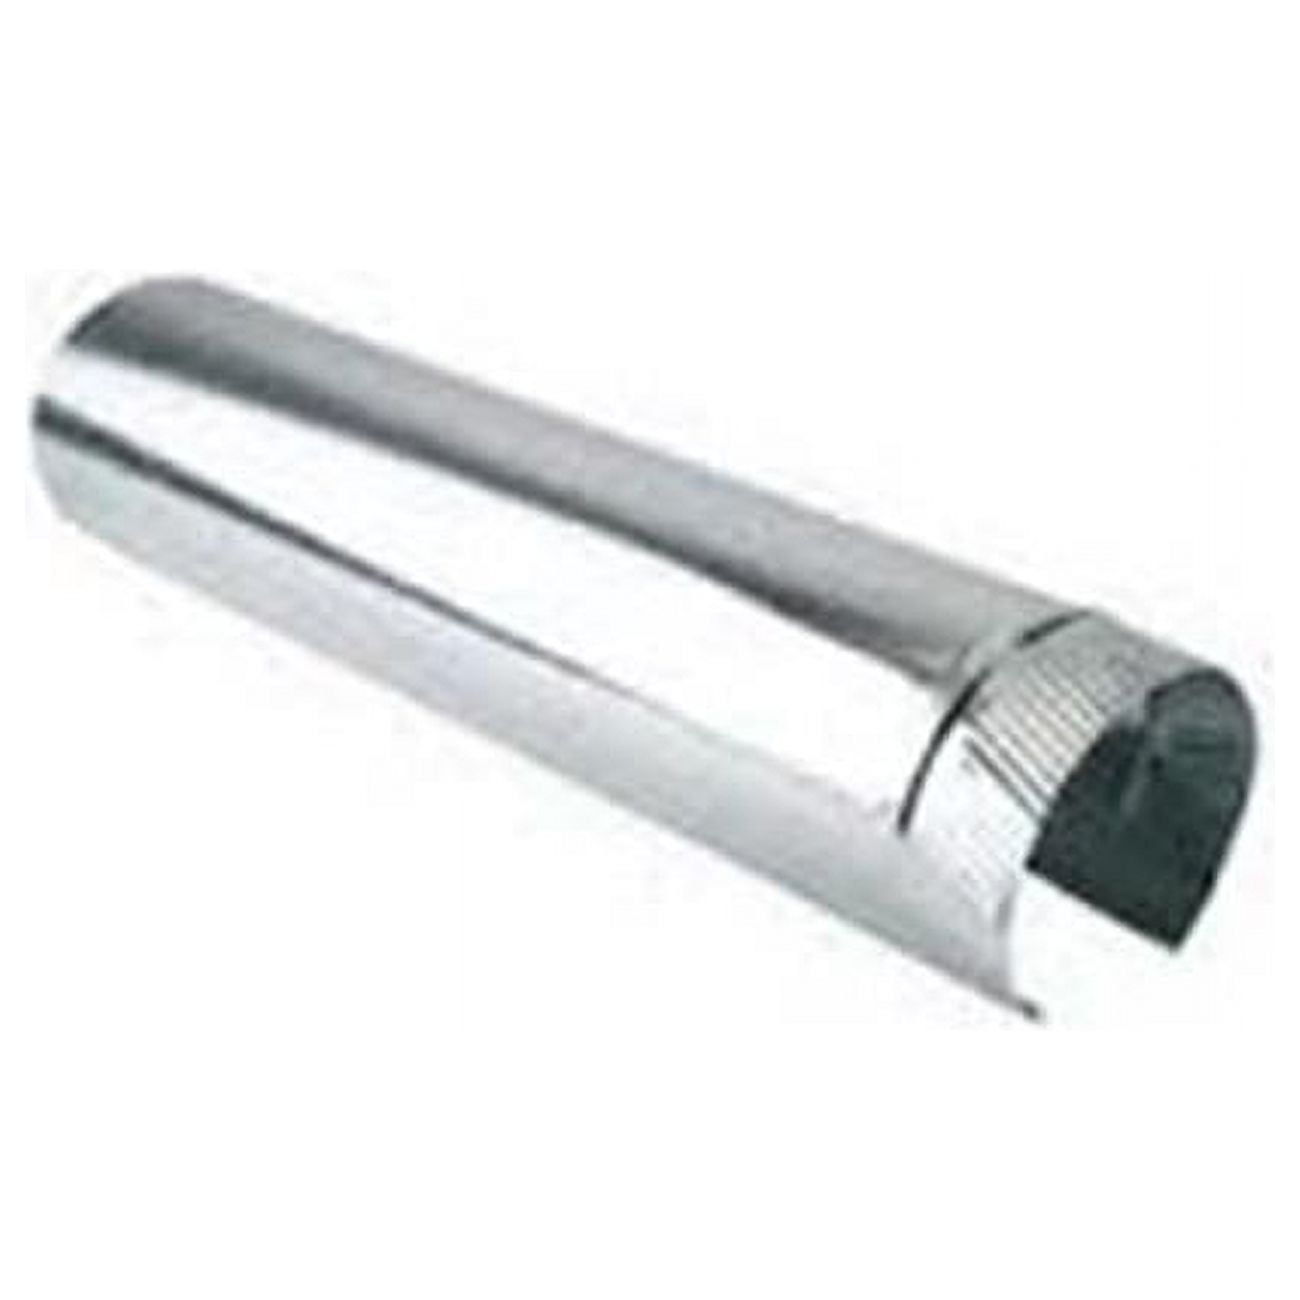 3602972 8 X 24 In. Galvanized Connector Pipe - 26 Gauge